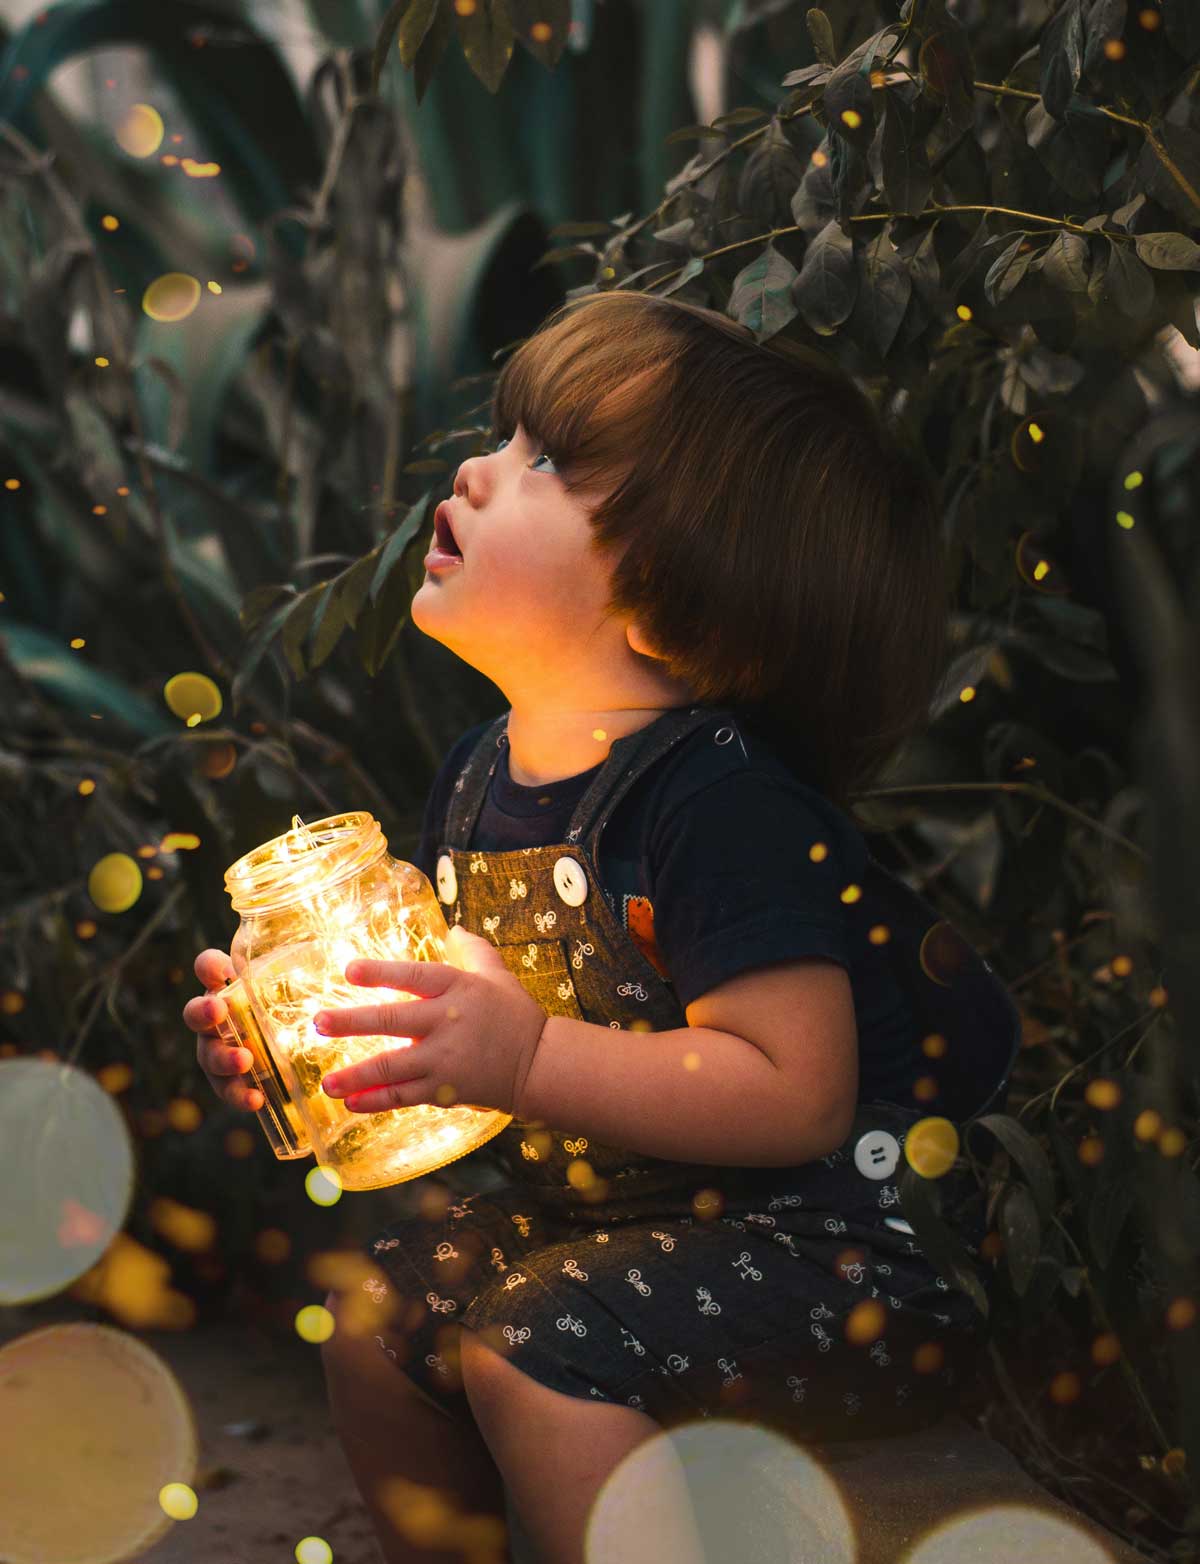 A child holding a jar of lights, gazing upward amidst a backdrop of leaves.